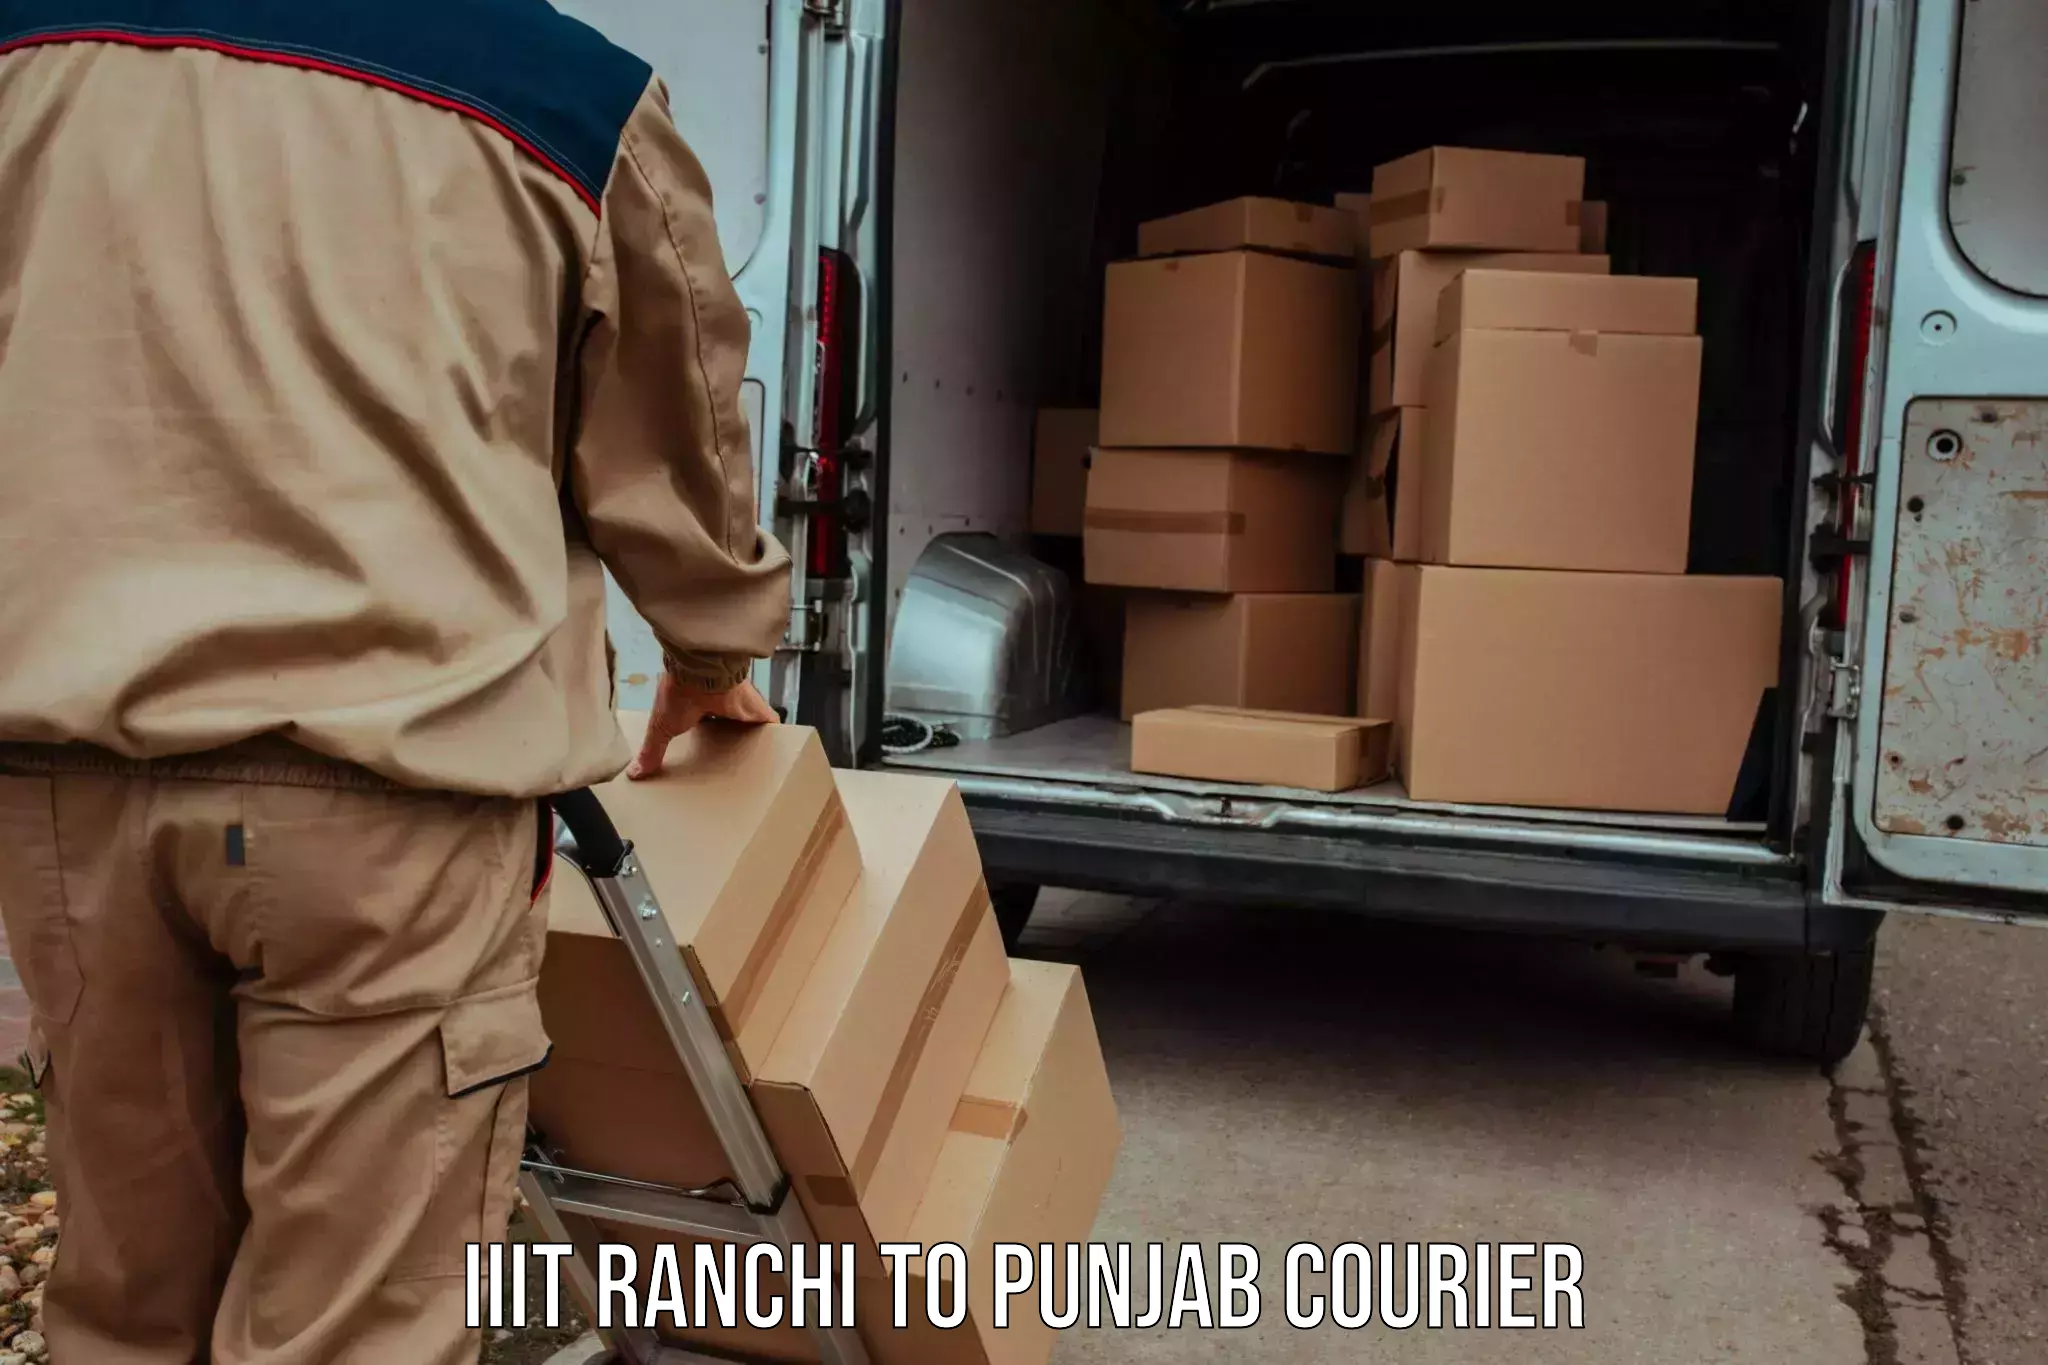 Express package services IIIT Ranchi to Bathinda